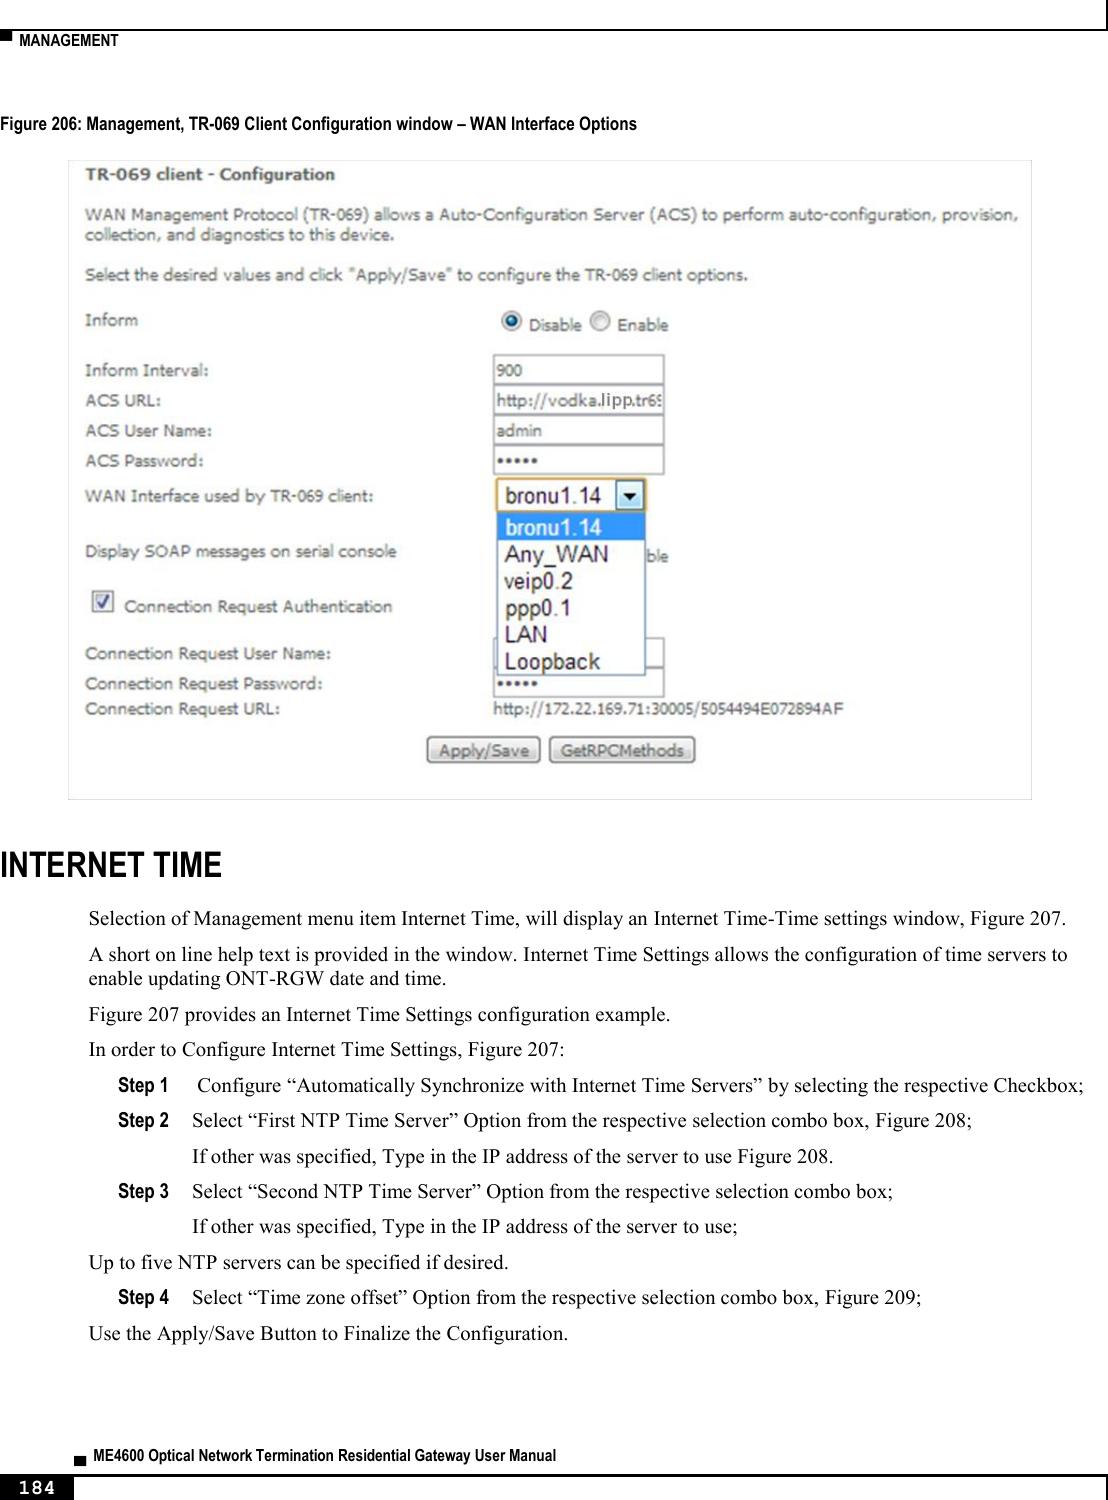  ▀  MANAGEMENT   ▄  ME4600 Optical Network Termination Residential Gateway User Manual 184    Figure 206: Management, TR-069 Client Configuration window – WAN Interface Options  INTERNET TIME Selection of Management menu item Internet Time, will display an Internet Time-Time settings window, Figure 207. A short on line help text is provided in the window. Internet Time Settings allows the configuration of time servers to enable updating ONT-RGW date and time. Figure 207 provides an Internet Time Settings configuration example. In order to Configure Internet Time Settings, Figure 207: Step 1  Configure “Automatically Synchronize with Internet Time Servers” by selecting the respective Checkbox; Step 2 Select “First NTP Time Server” Option from the respective selection combo box, Figure 208; If other was specified, Type in the IP address of the server to use Figure 208. Step 3 Select “Second NTP Time Server” Option from the respective selection combo box; If other was specified, Type in the IP address of the server to use; Up to five NTP servers can be specified if desired. Step 4 Select “Time zone offset” Option from the respective selection combo box, Figure 209; Use the Apply/Save Button to Finalize the Configuration.  